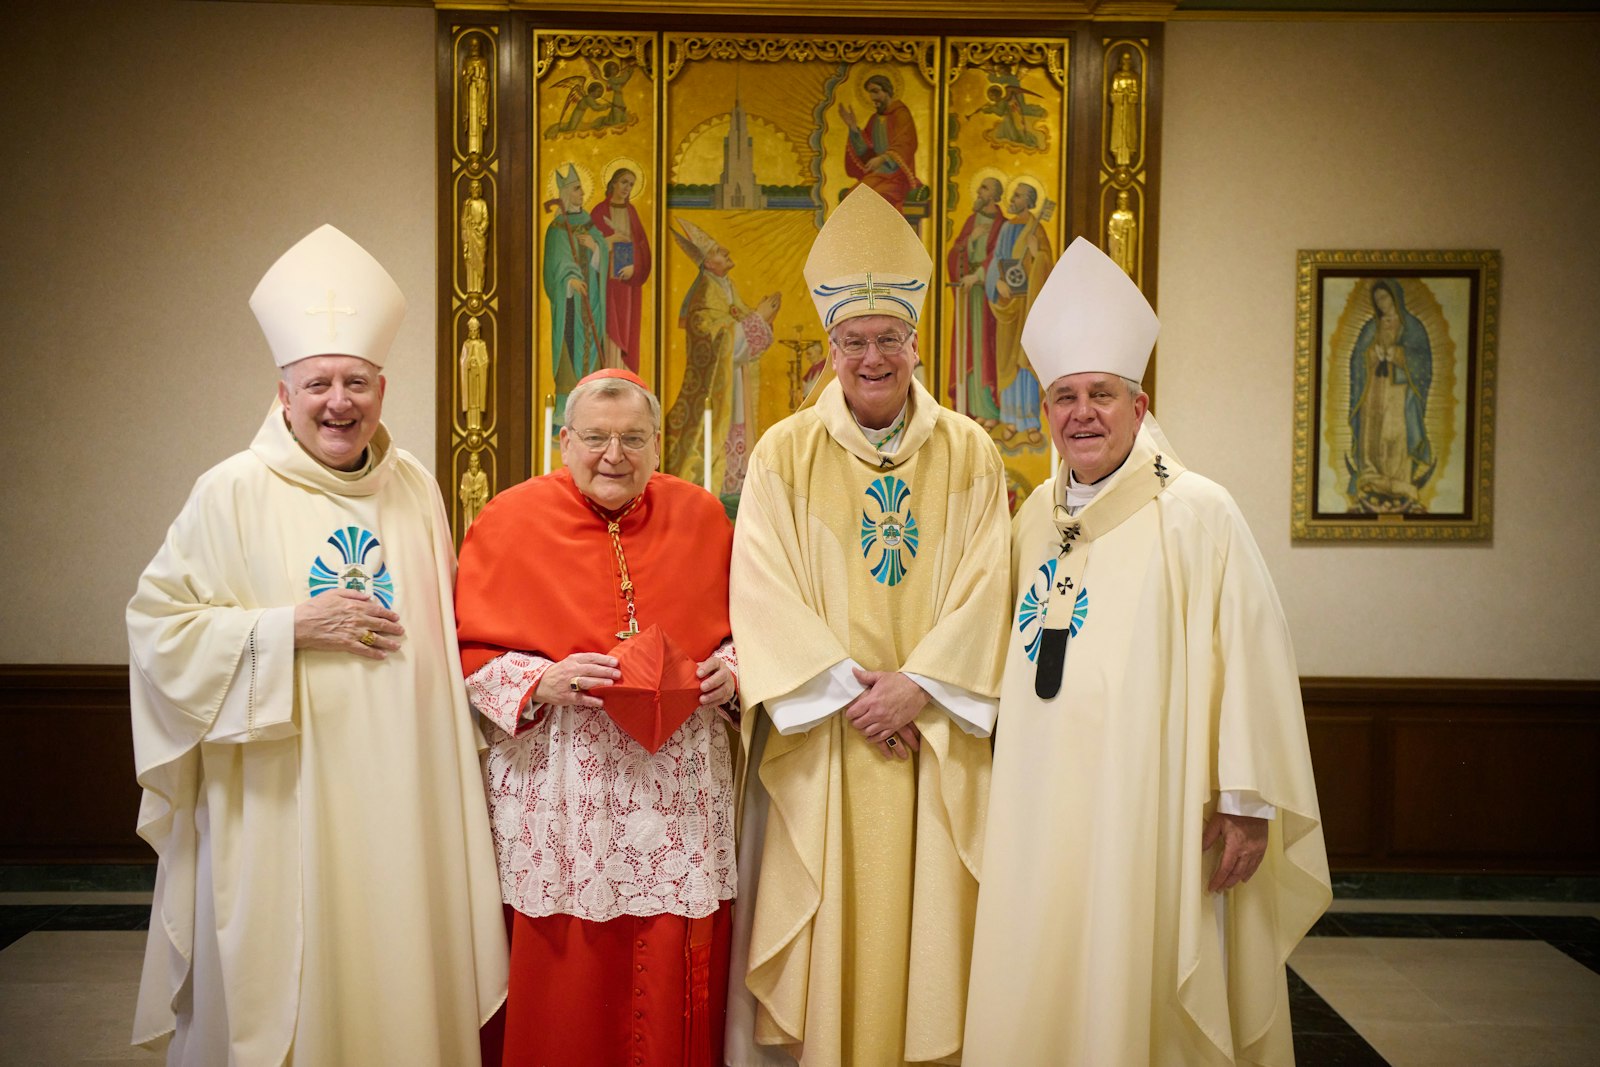 Bishop Gerard W. Battersby, second from right, is pictured with three of his predecessor bishops before the installation Mass. Left to right are Bishop William P. Callahan, OFM Conv., the 10th bishop of La Crosse, Cardinal Raymond L. Burke, the diocese's eighth bishop, Bishop Battersby and Milwaukee Archbishop Jerome E. Listecki, who served as La Crosse's ninth bishop. (Courtesy of the Diocese of La Crosse)